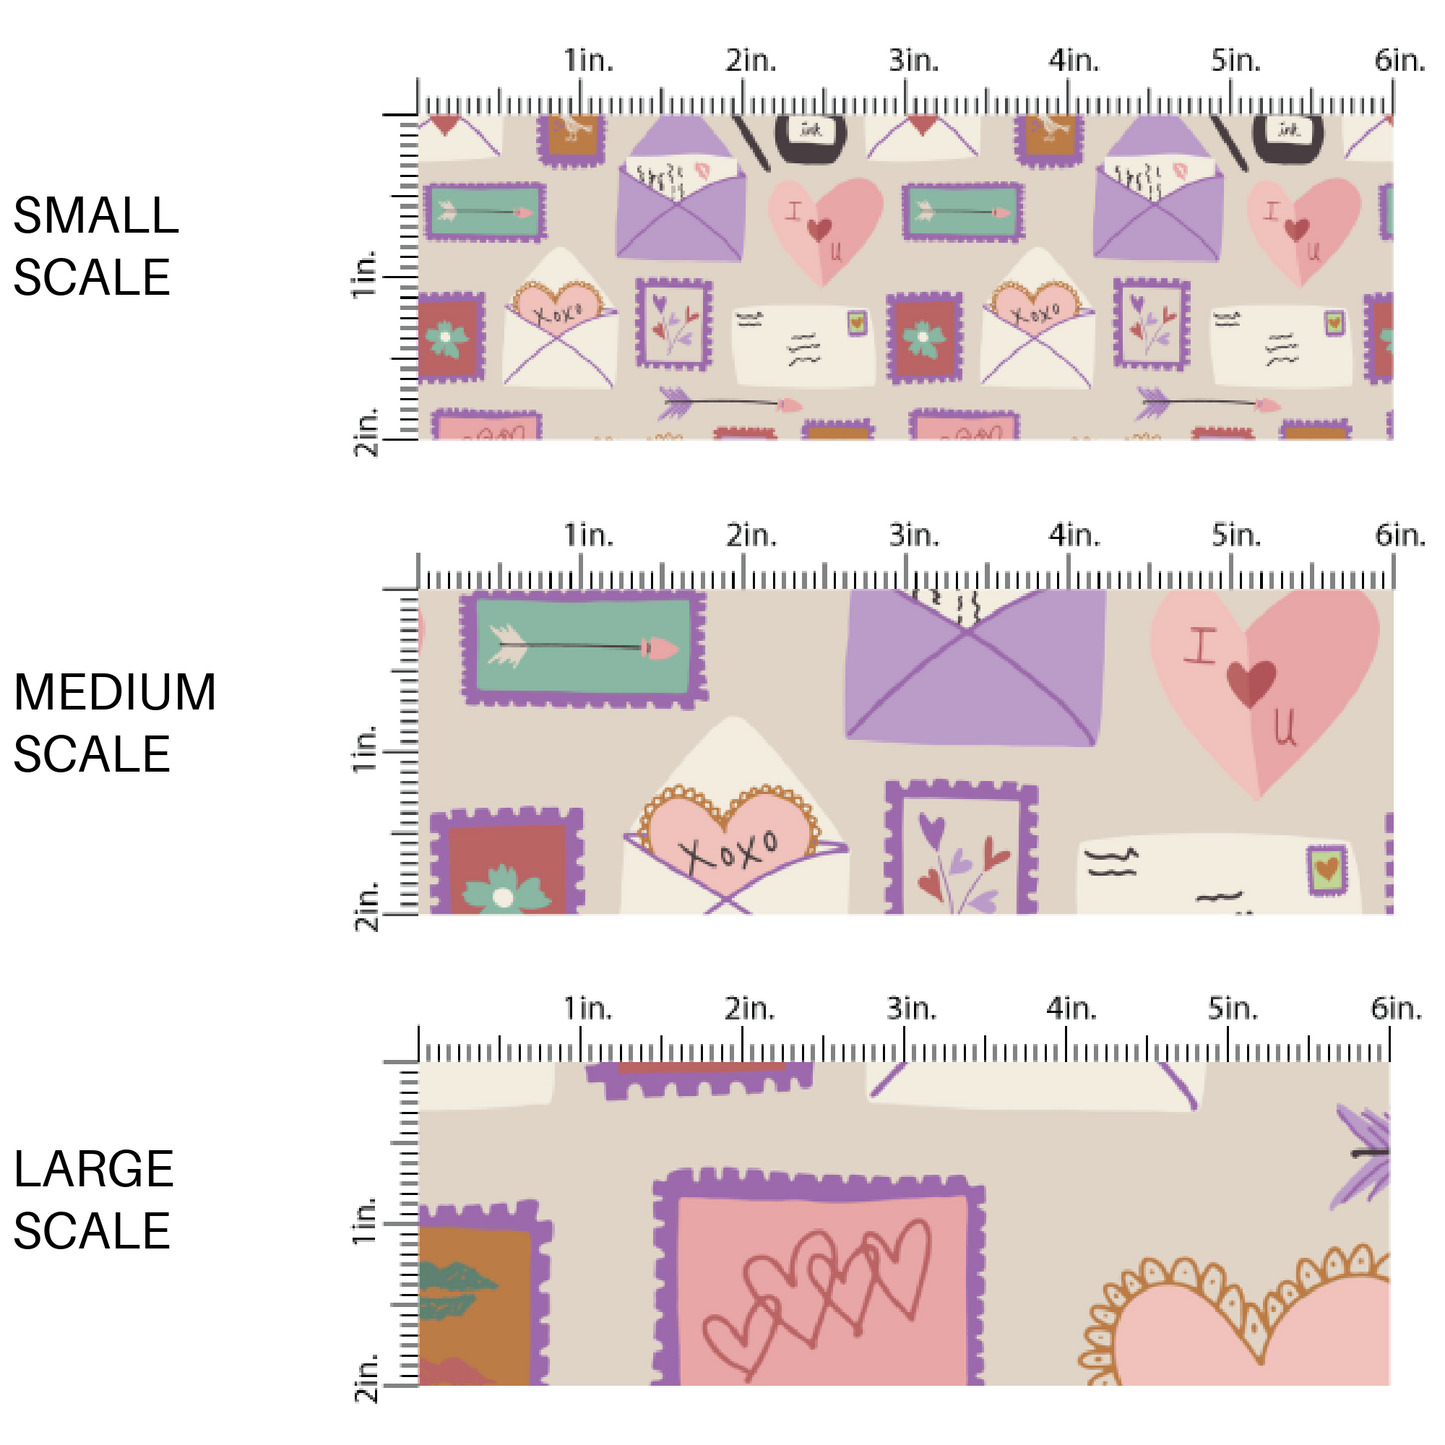 Cream colored fabric image guide with multi-colored envelopes fabric scaling sizes 